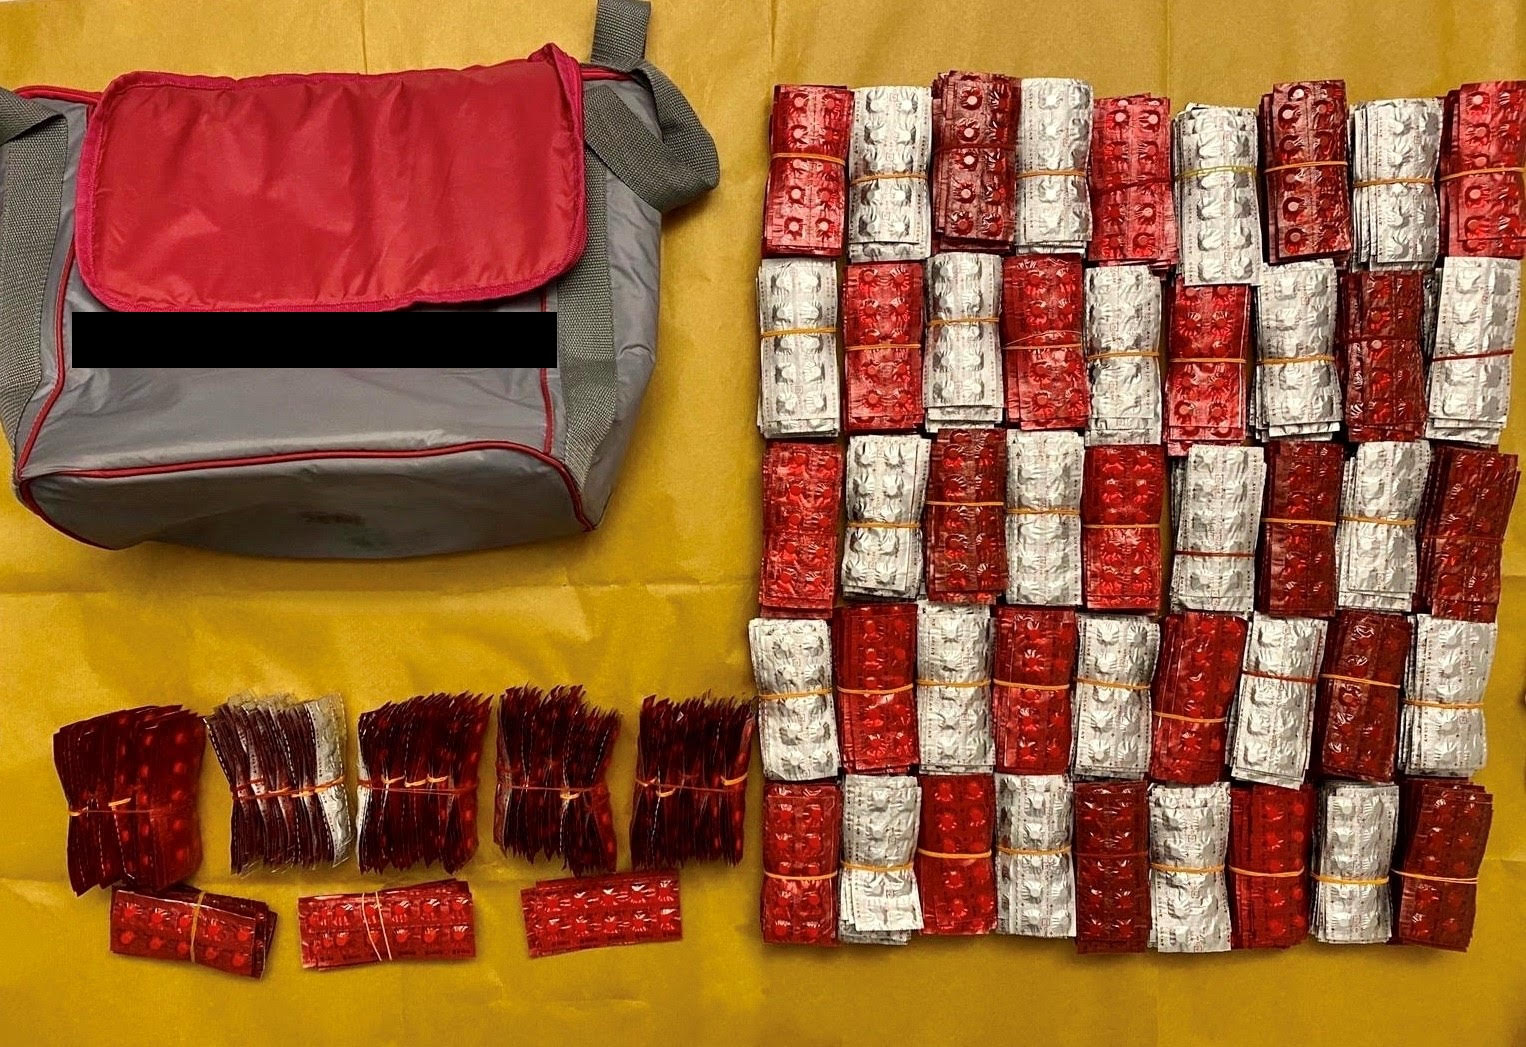 Photo 3 (CNB) - 13,970 Erimin-5 tablets seized from a hotel located in the vicinity of Beach Road.